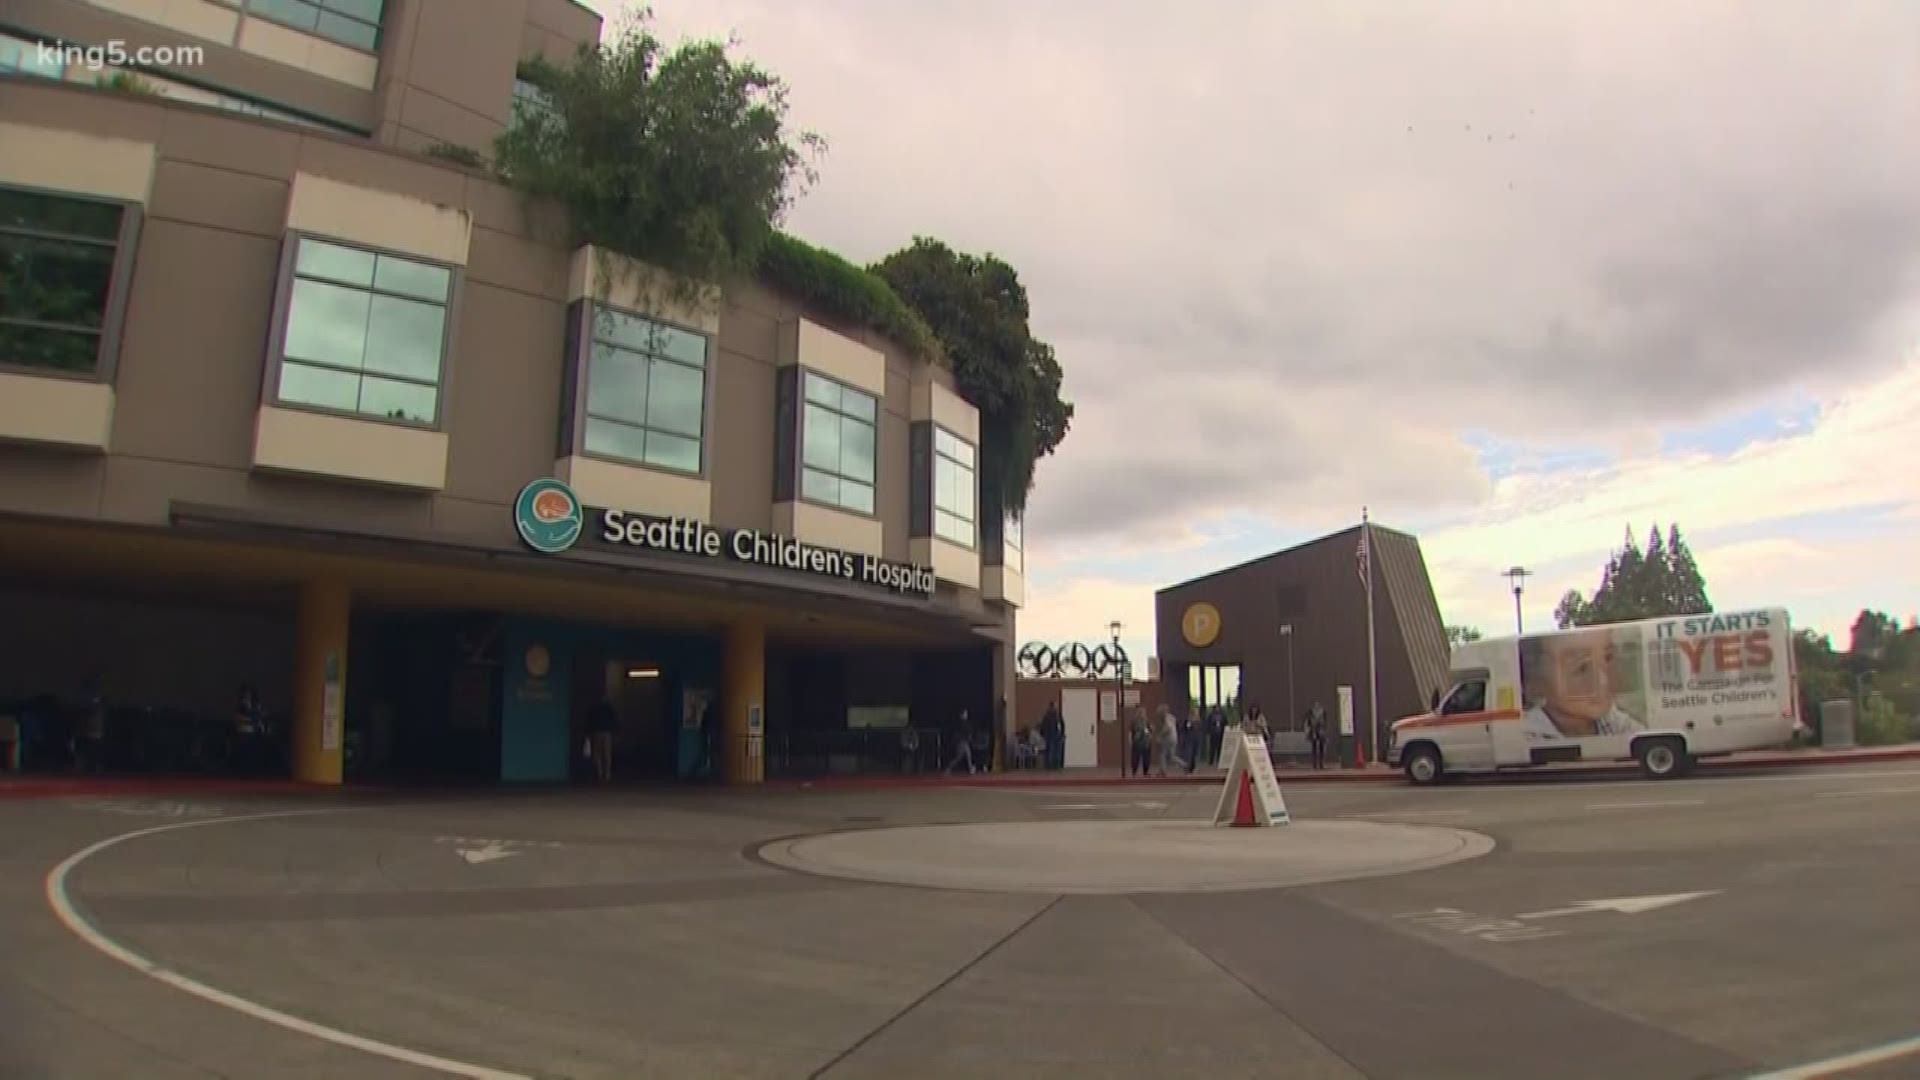 Seattle Children's closes some operating rooms after detecting mold, which could cause infections. The hospital confirms one patient is recovering after being diagnosed with a surgical site infection last month. The hospital says an investigation is underway. KING 5's Natalie Swaby reports on the search for the source of the problem.